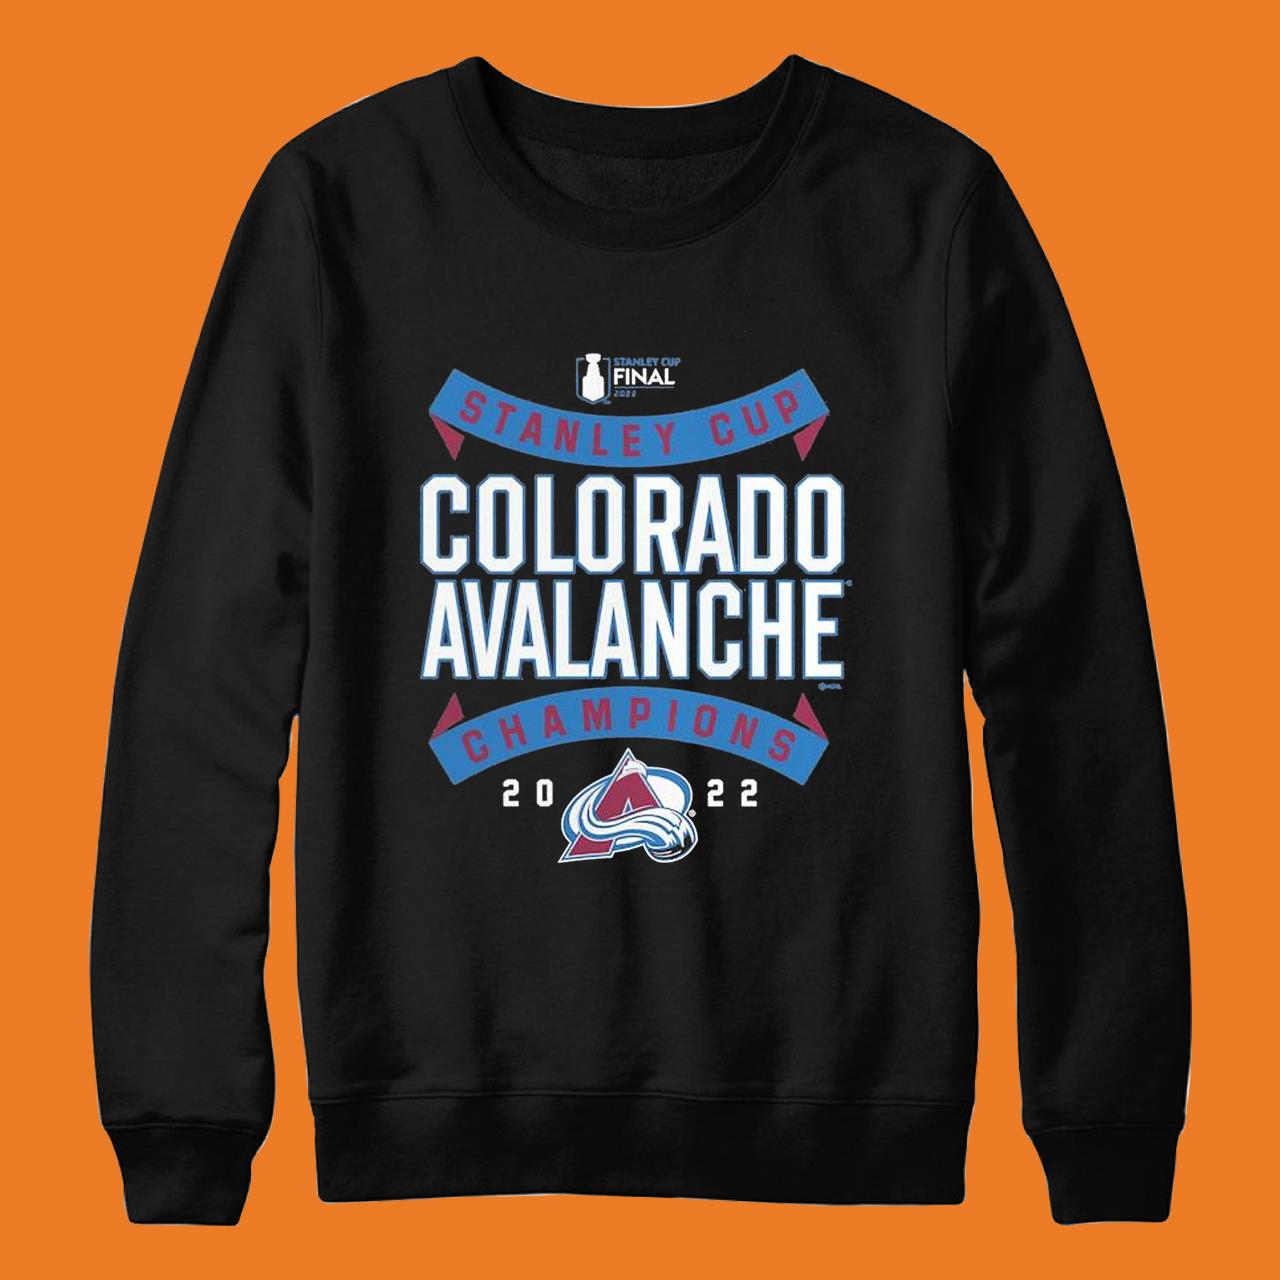 Stanley Cup Finals Colorado Avalanche Champions 2022 shirt